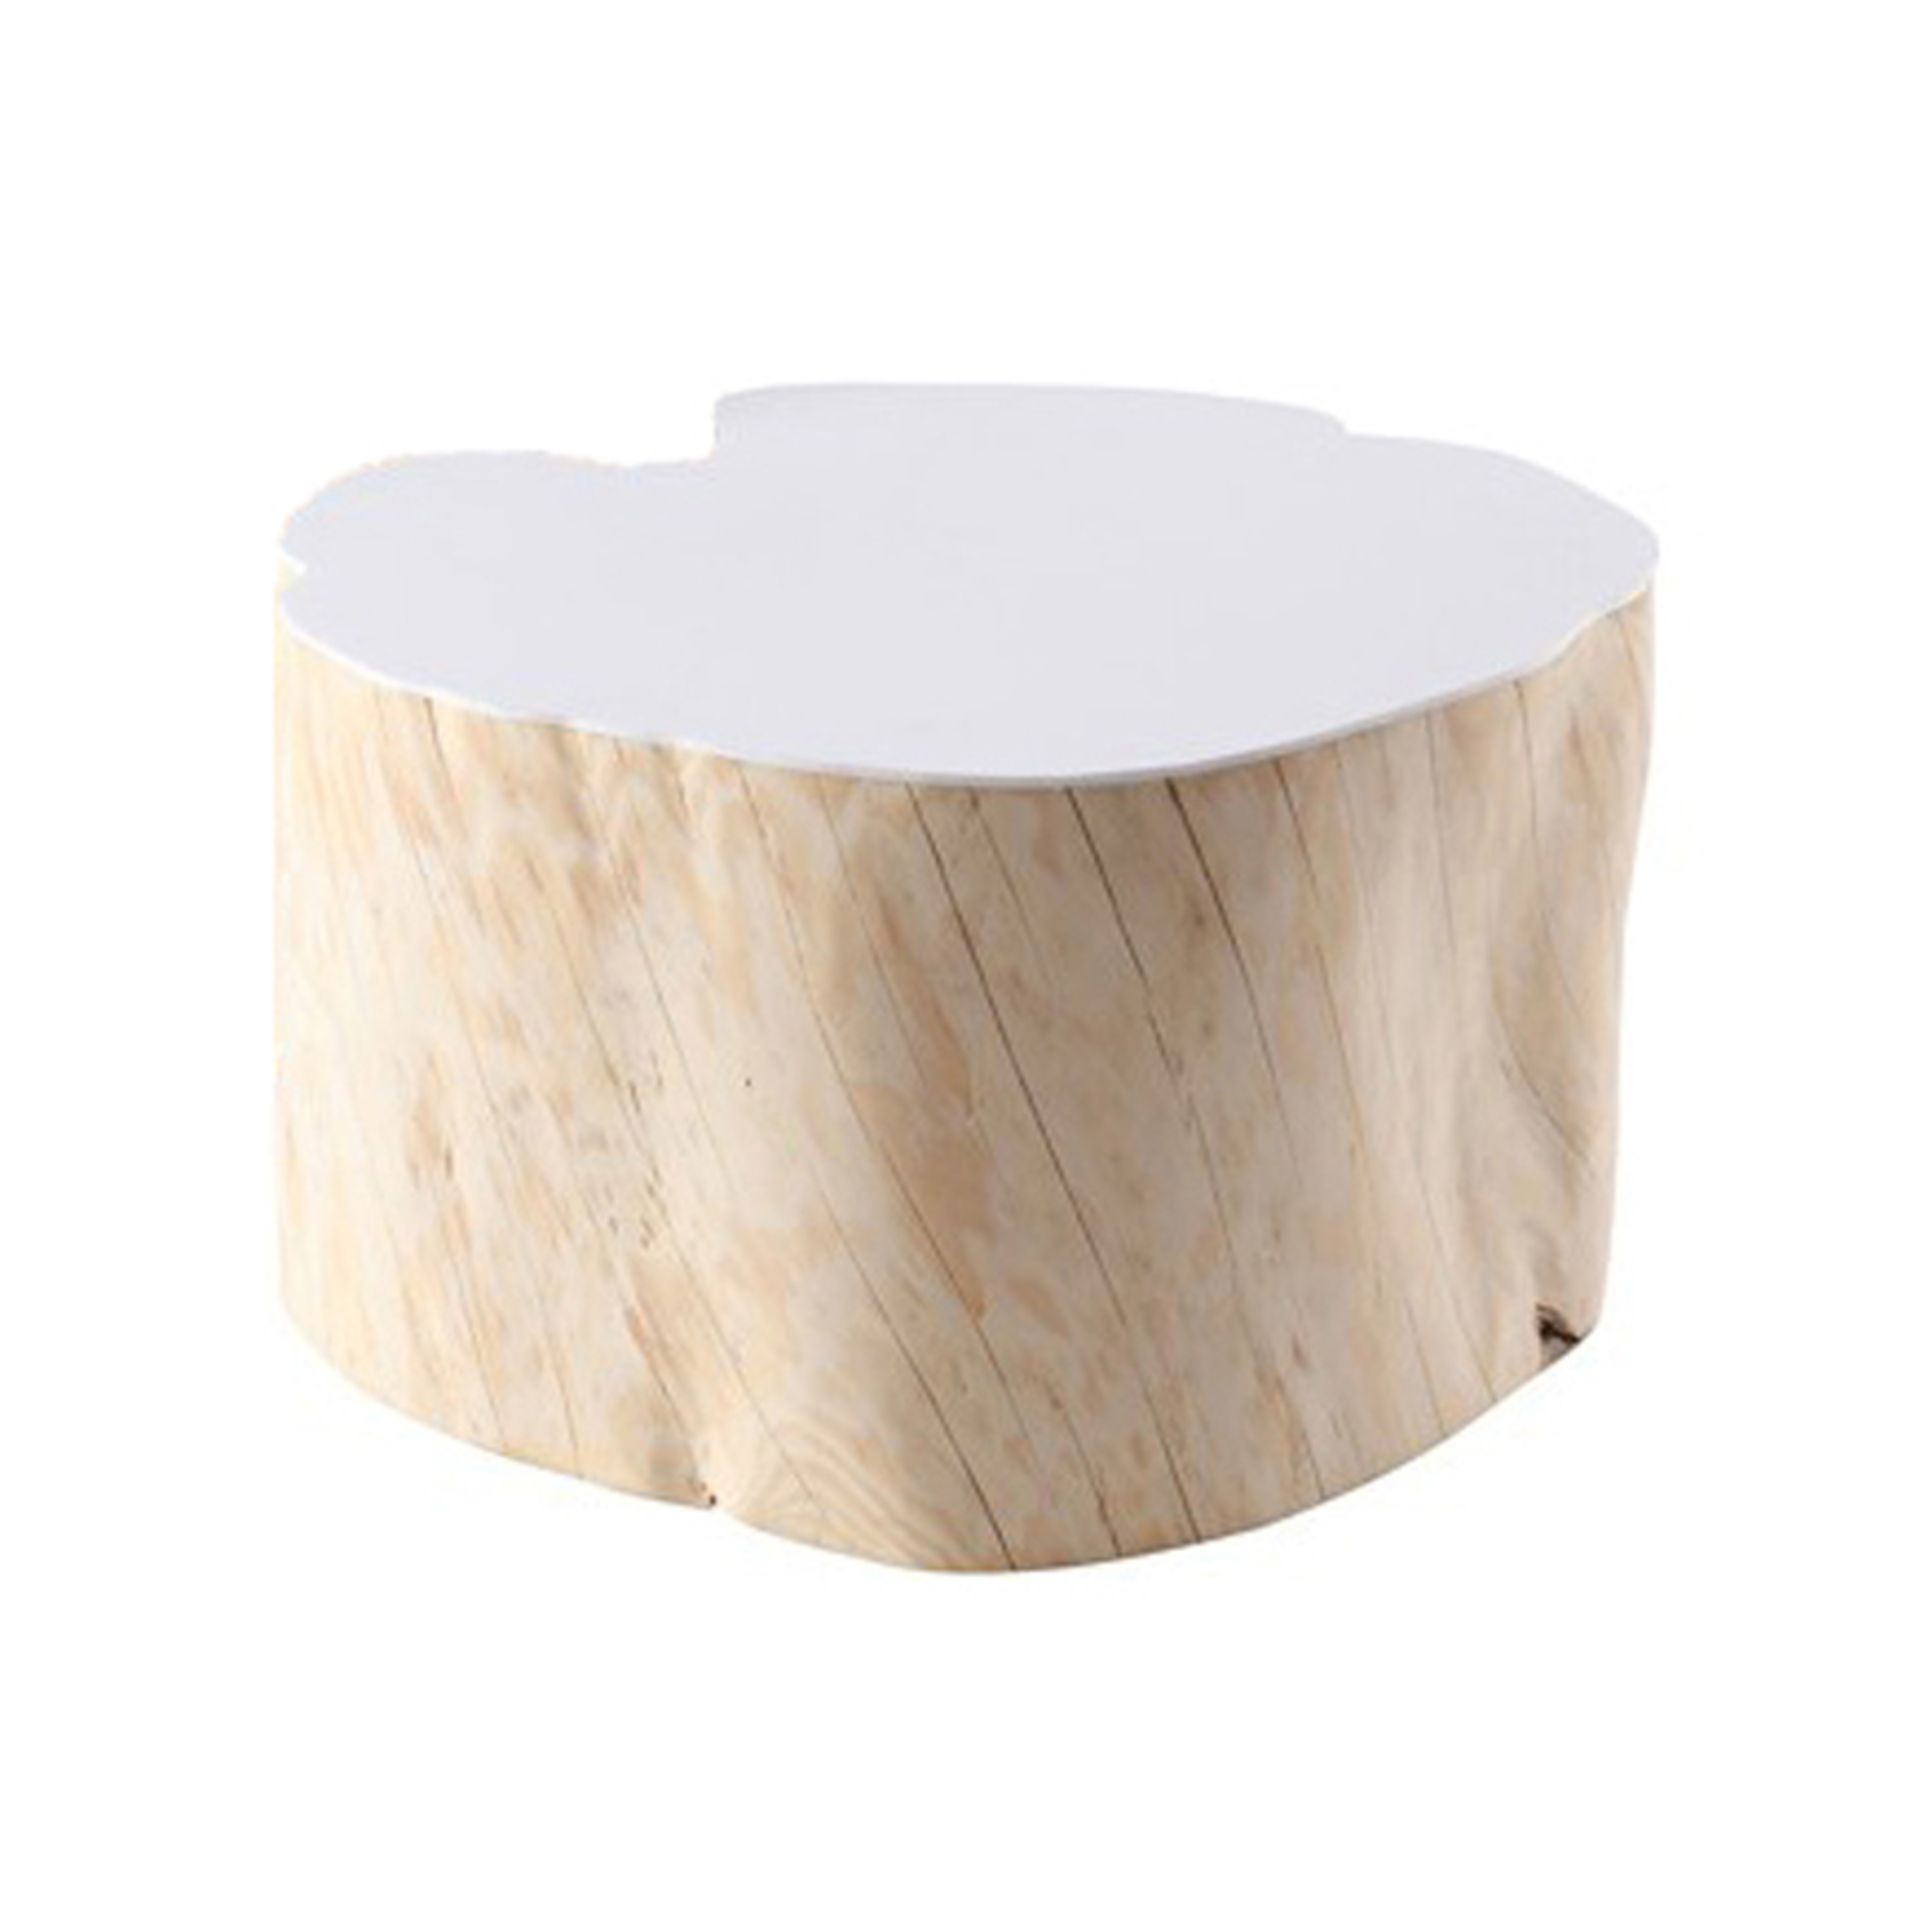 Bleu Nature F233 Galaq Coffee Table Debarked And White 75 X 75 X 35cm RRP £1111